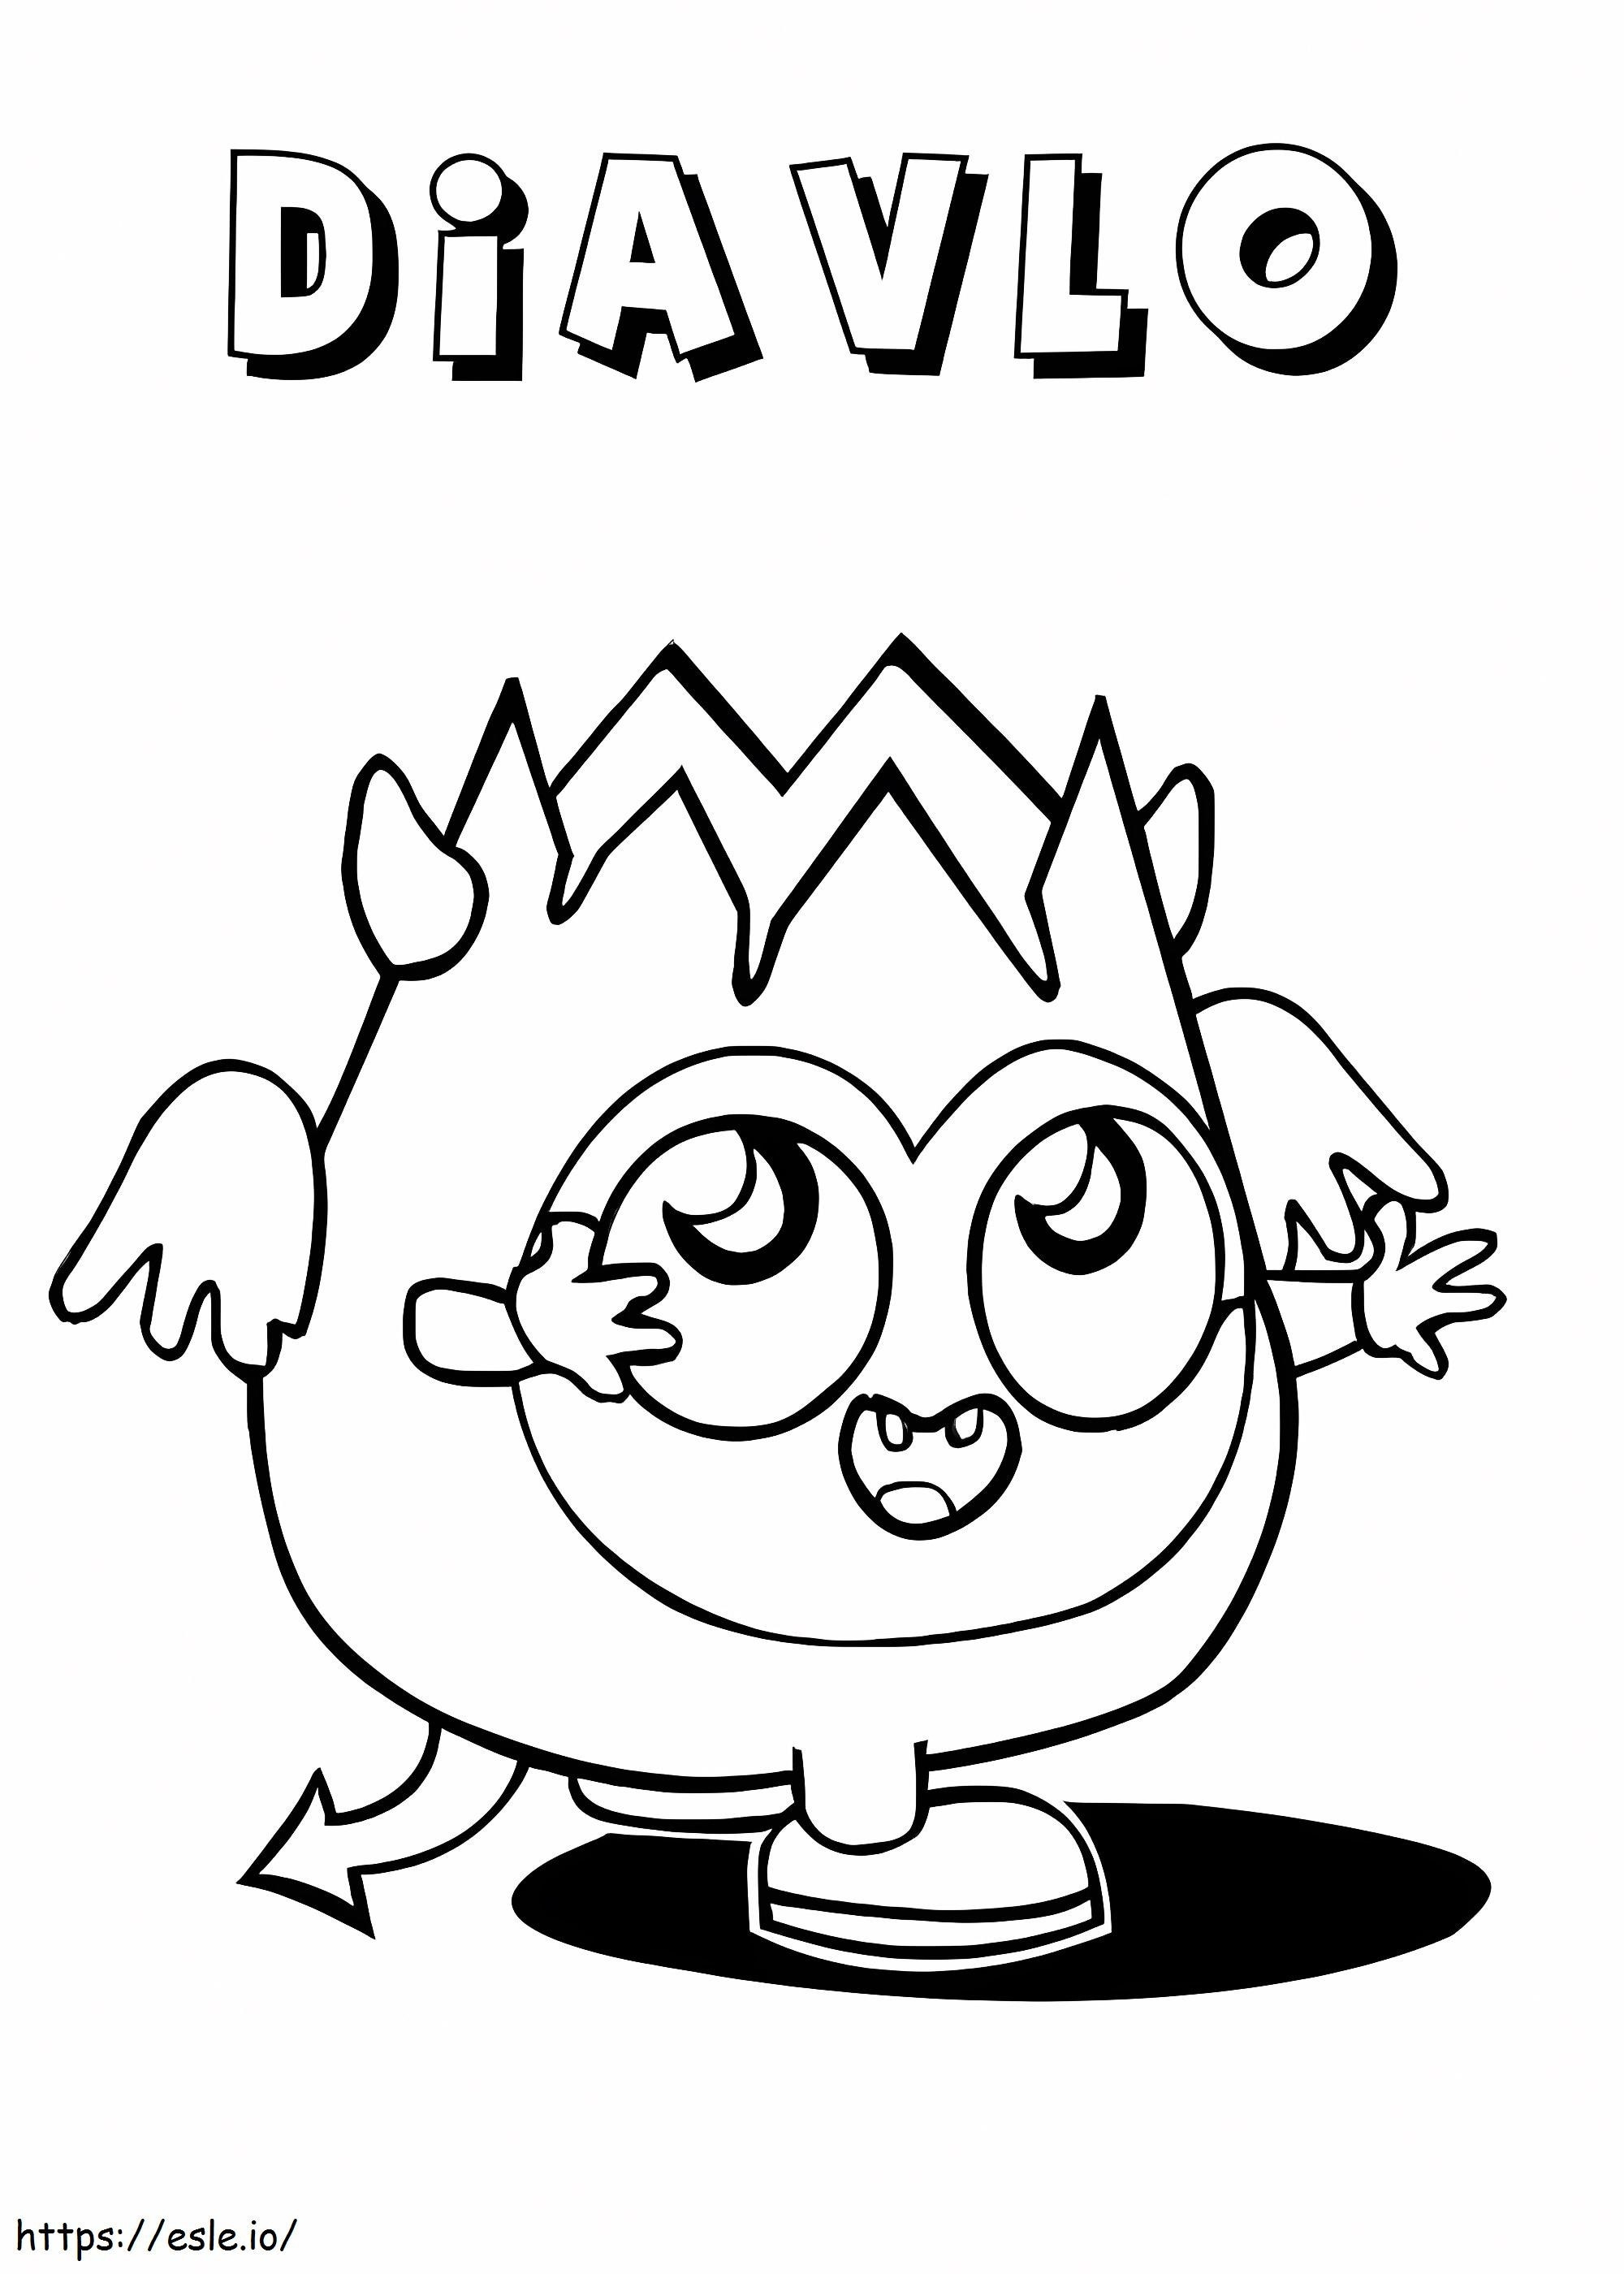 Diavlo From Moshi Monsters coloring page